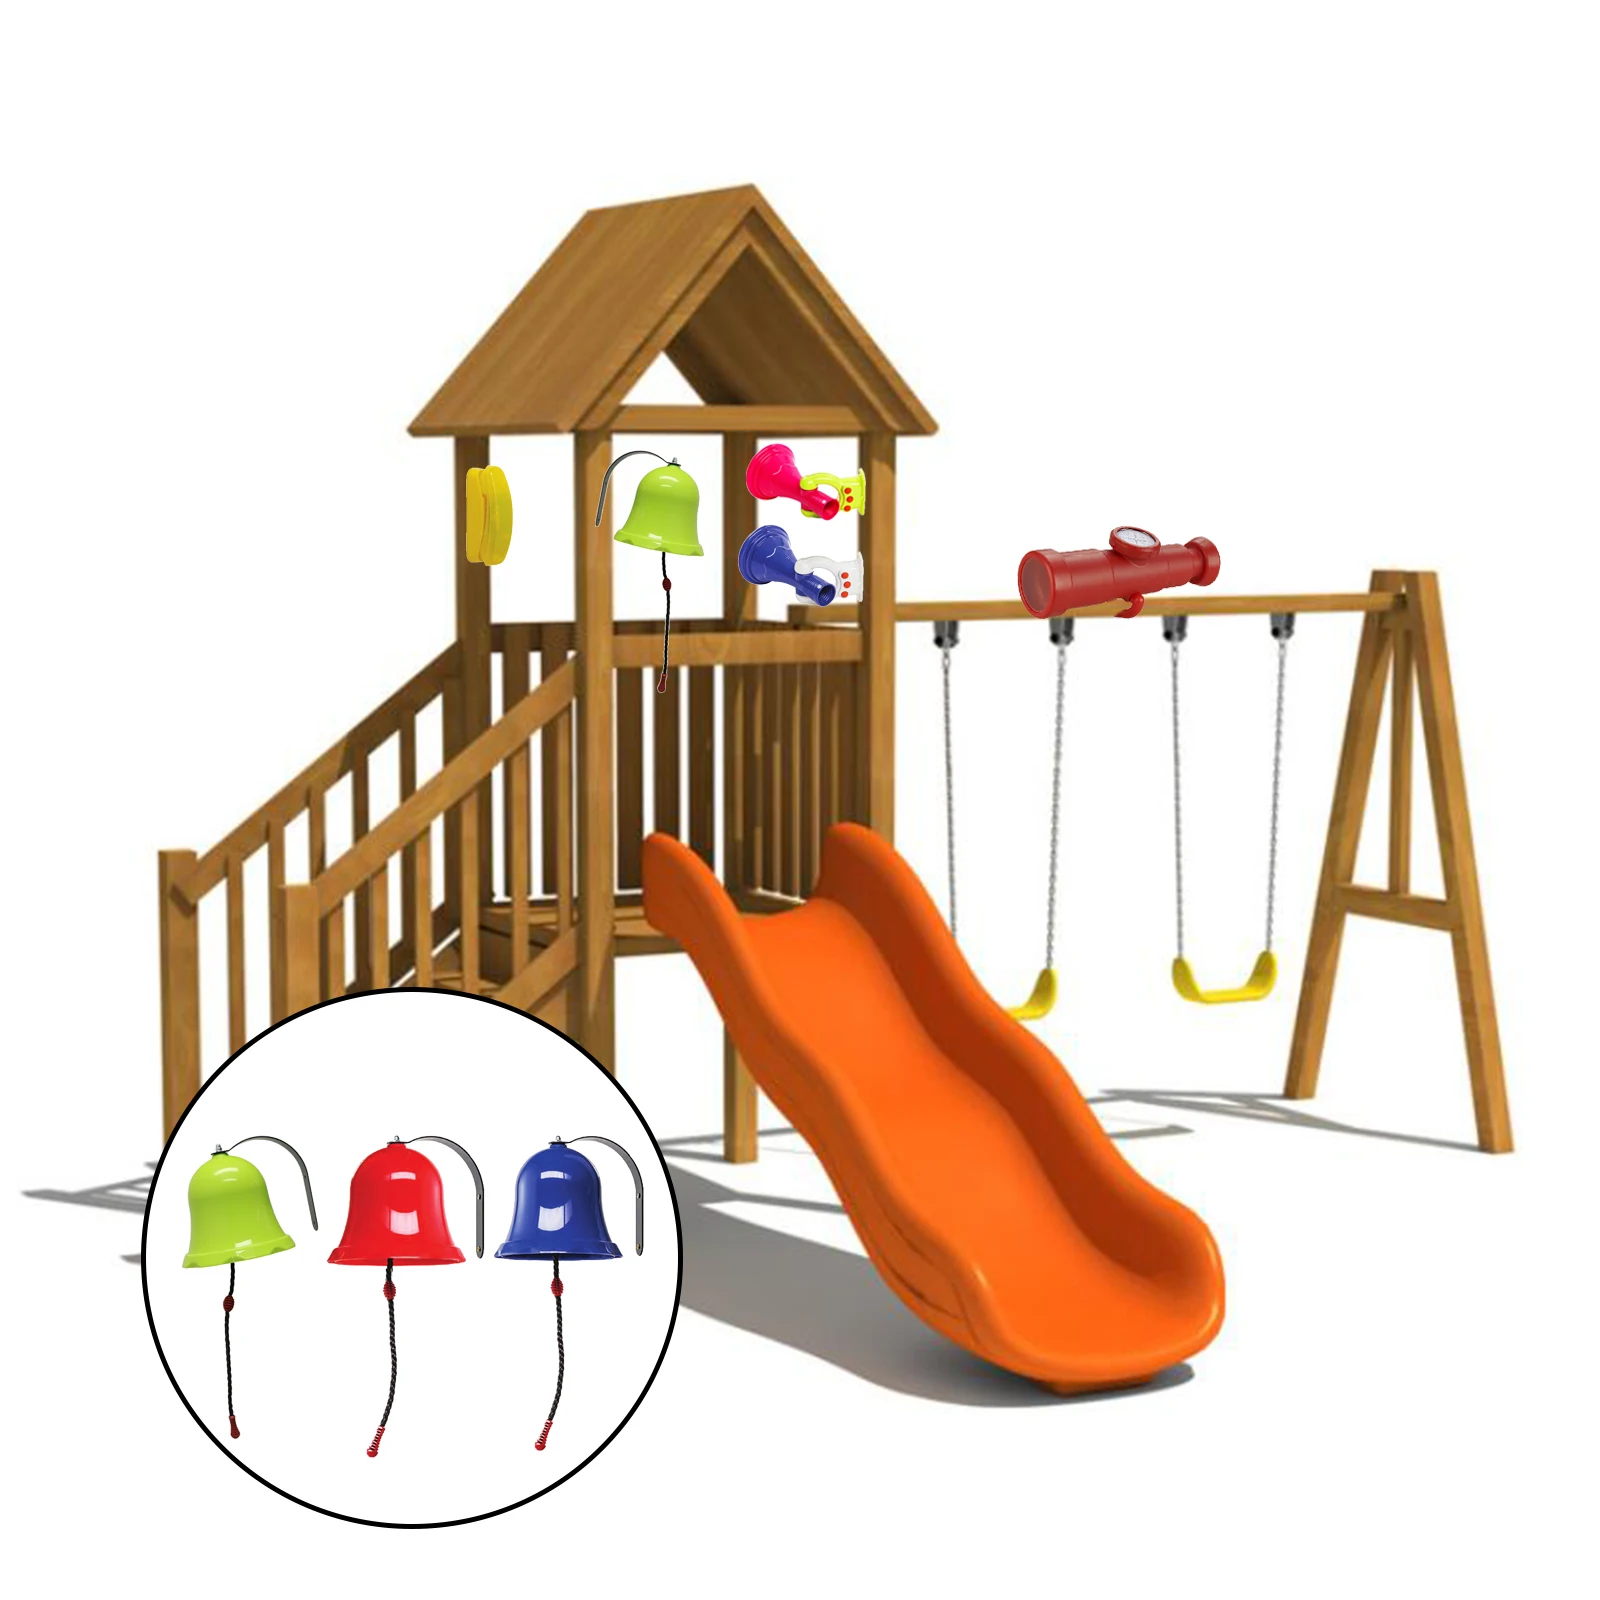 Educational Toys Bell Playground Hanging Bell Swing Set Accessory for Outdoor Wooden Swing Set for Boys Girls Ages 3+